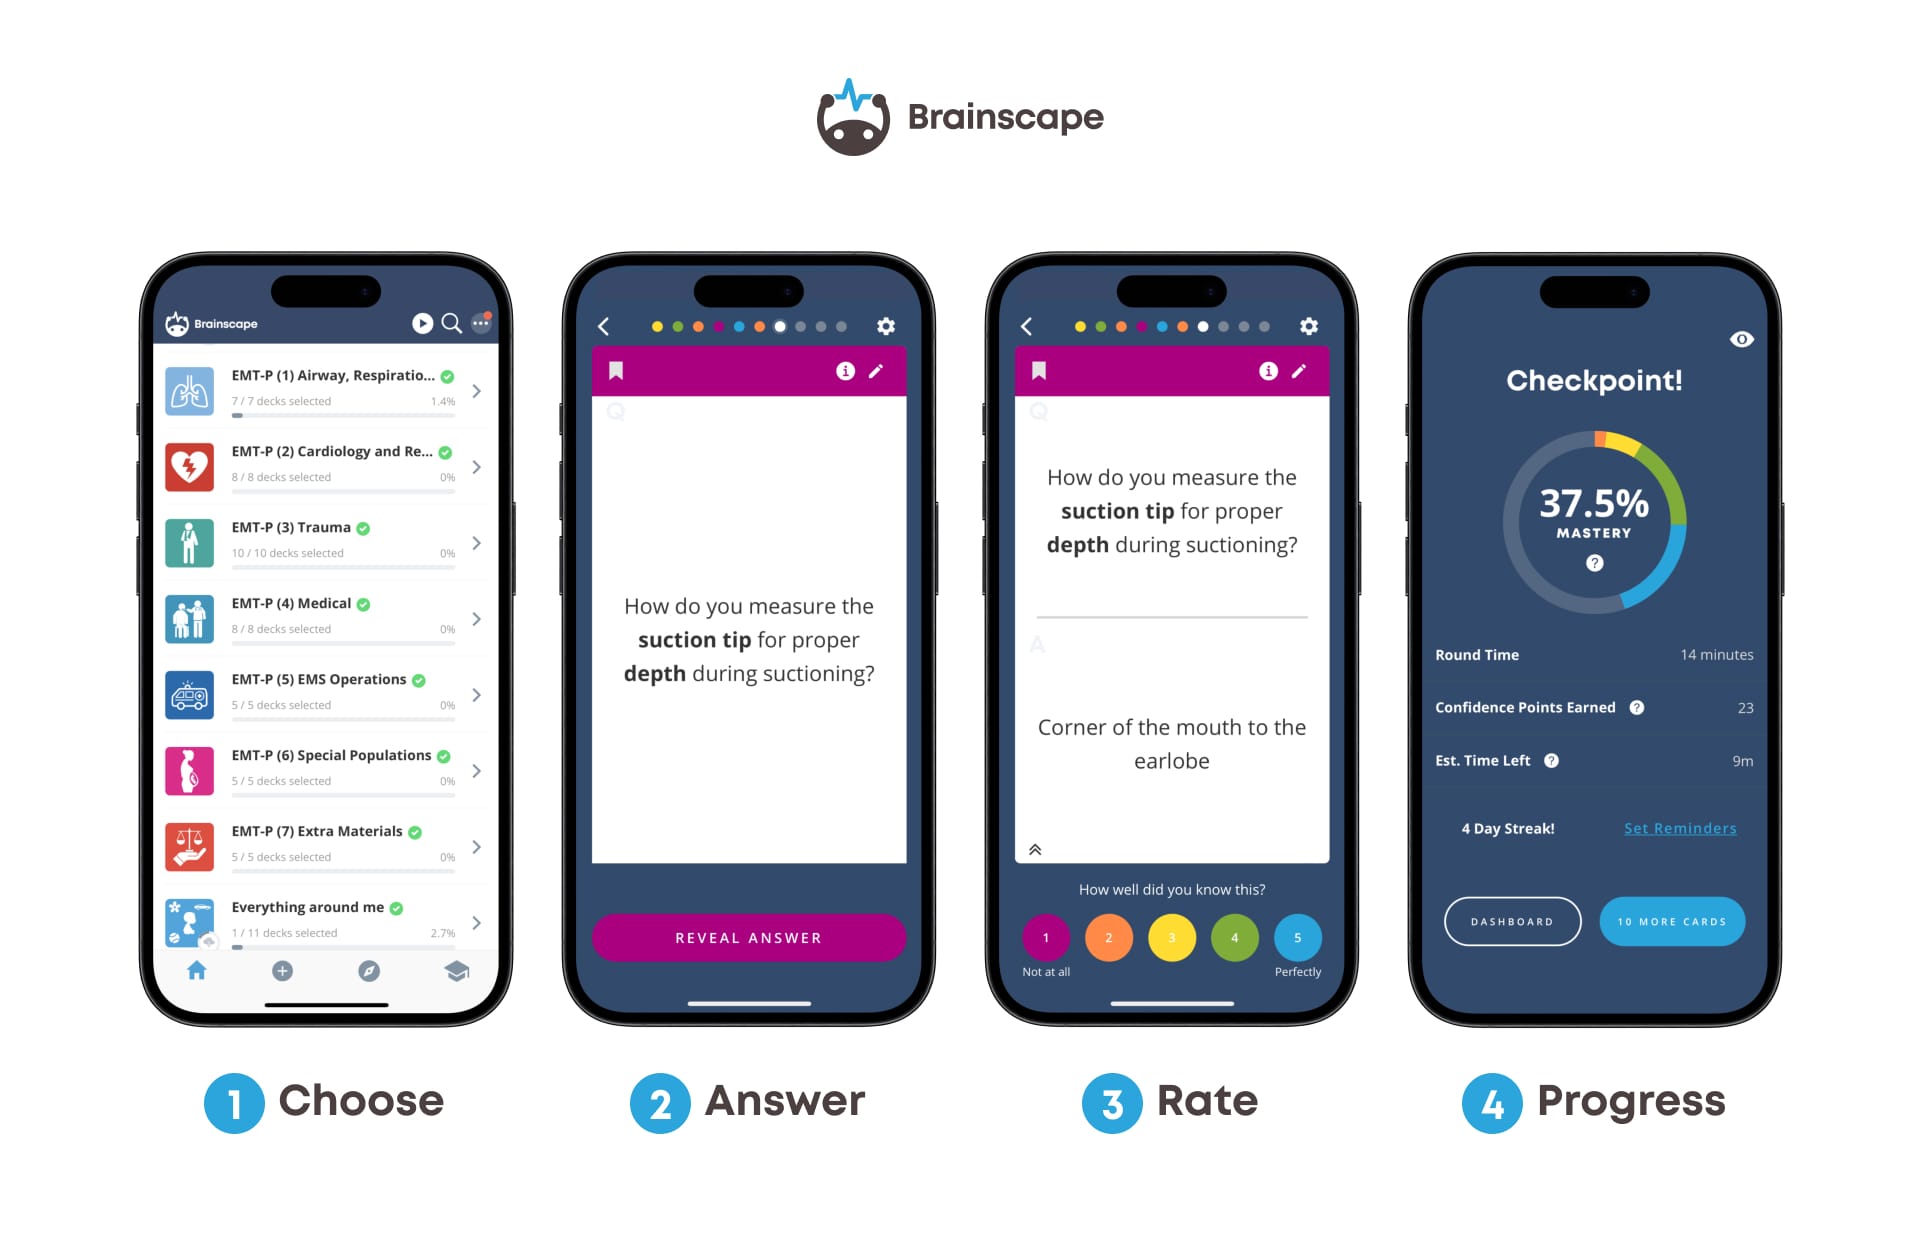 Brainscape's NREMT Paramedic course dashboard, flashcard question and answer, and progress meter